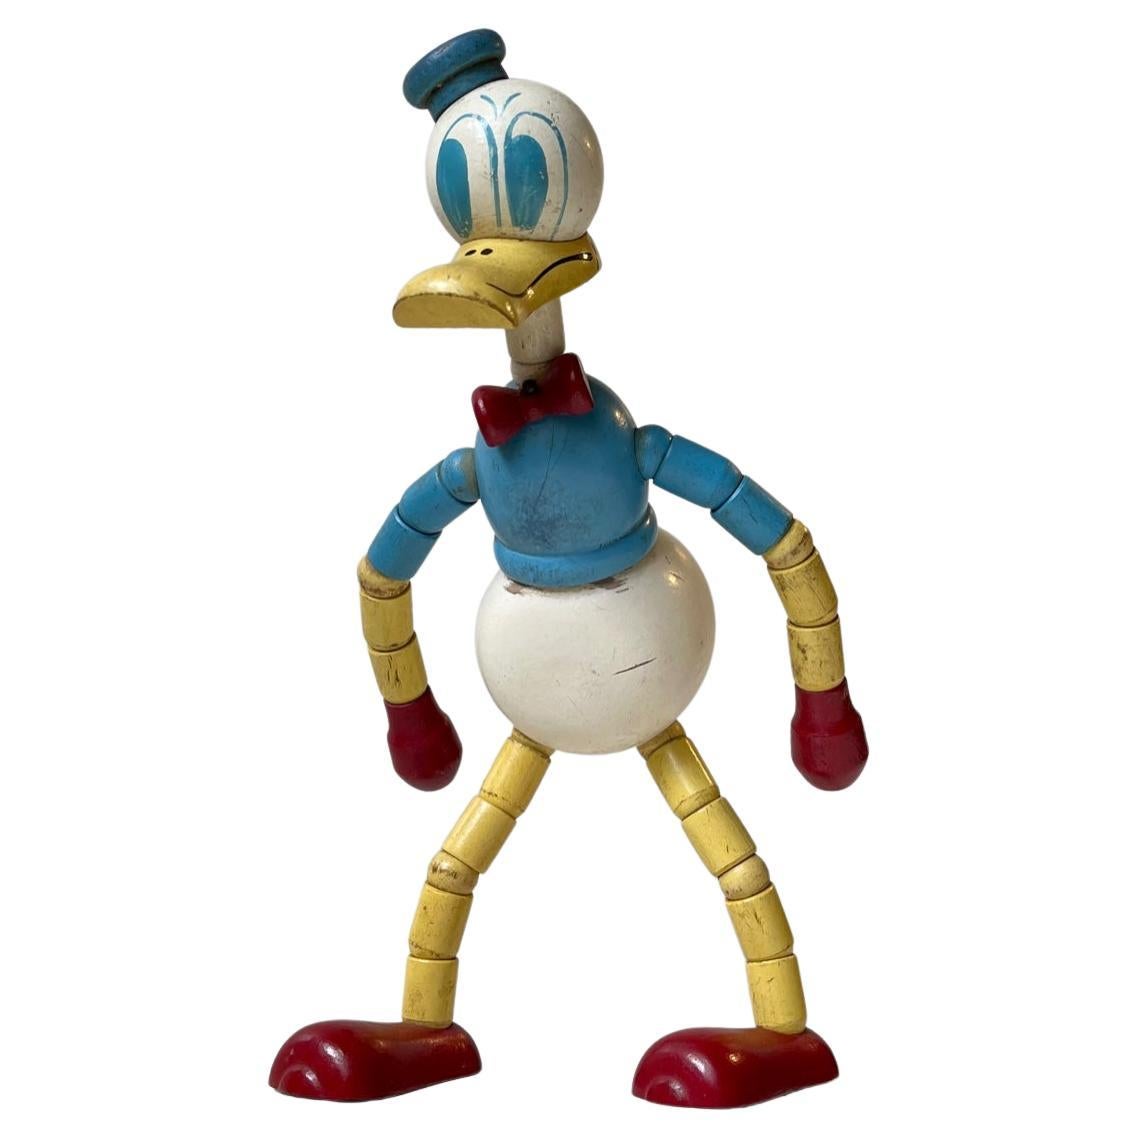 Vintage Donald Duck in Painted Beech with Articulated Limbs by Brio Sweden